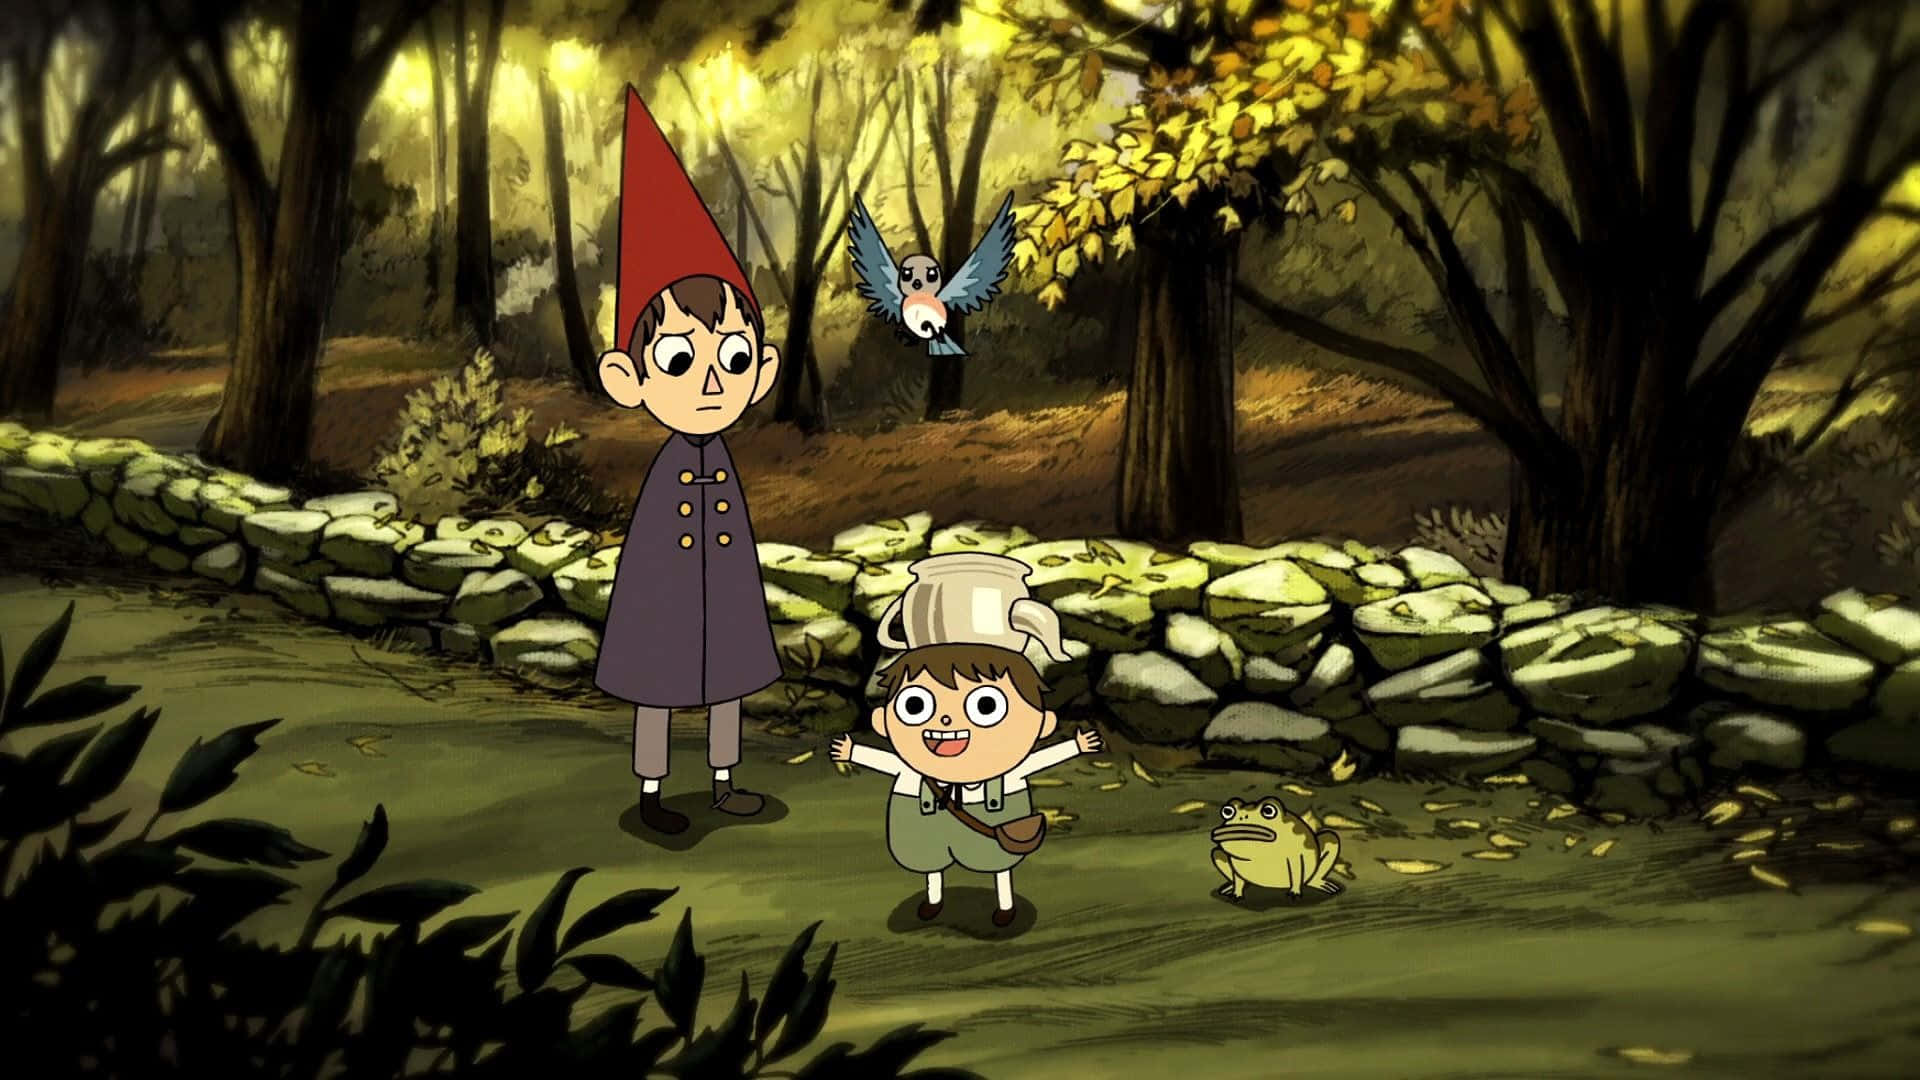 The mysterious and enchanting world of Over the Garden Wall